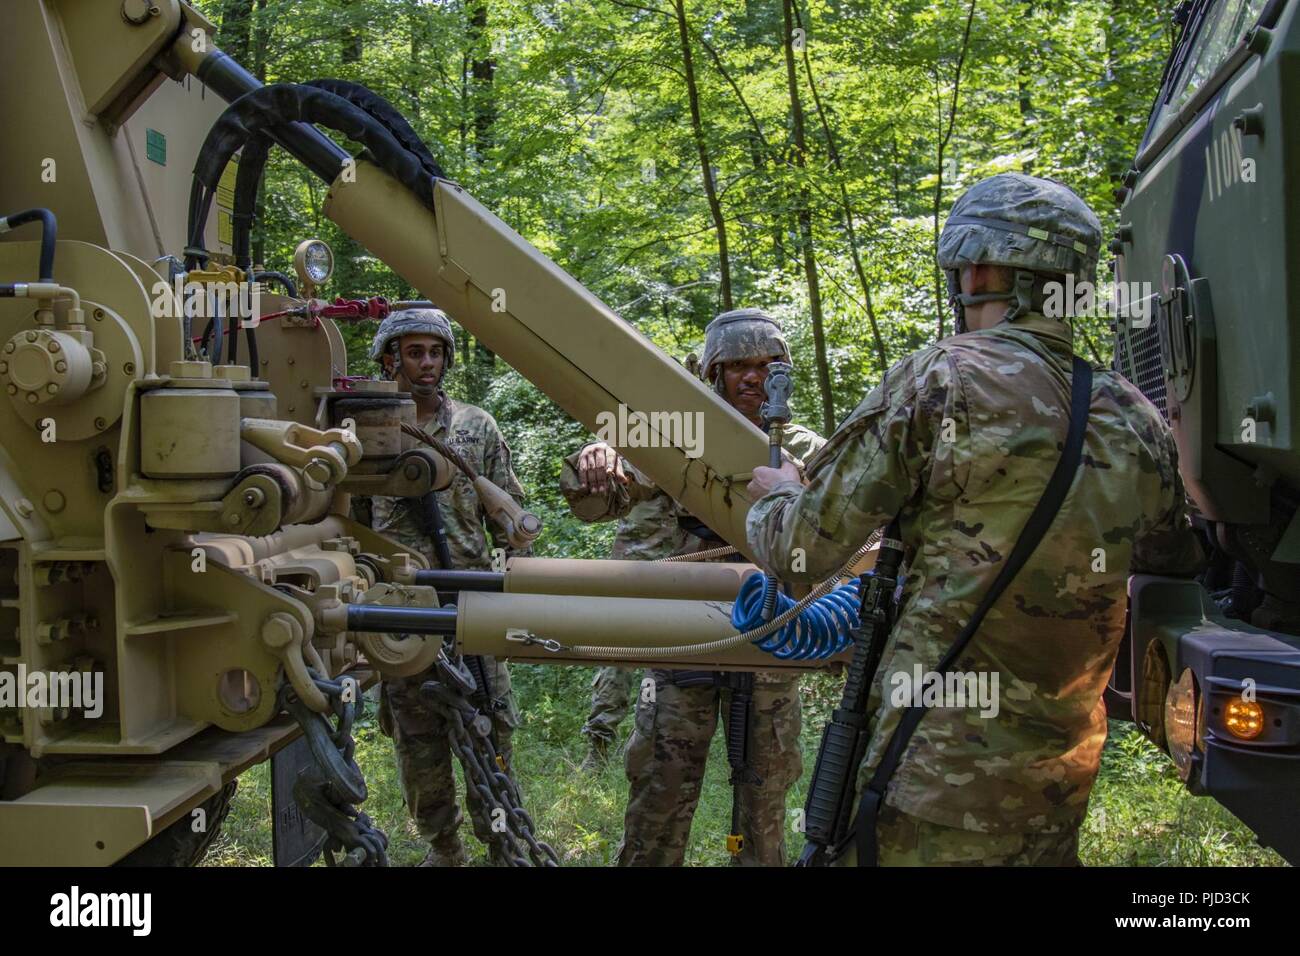 New York Army National Guard Soldiers with the 1569th Transportation Company, 369th Sustainment Brigade, New York Army National Guard, use a M1089 Wrecker to recover a damaged vehicle during their annual training at Fort Indiantown Gap, P.A. on July 16, 2018. More than 370 New York Army National Guard Soldiers from military police, engineer and transportation companies used this year’s three weeks of summer training and the improved multi-million dollar facilities at Fort Indiantown Gap to hone their skills in July 2018 Stock Photo